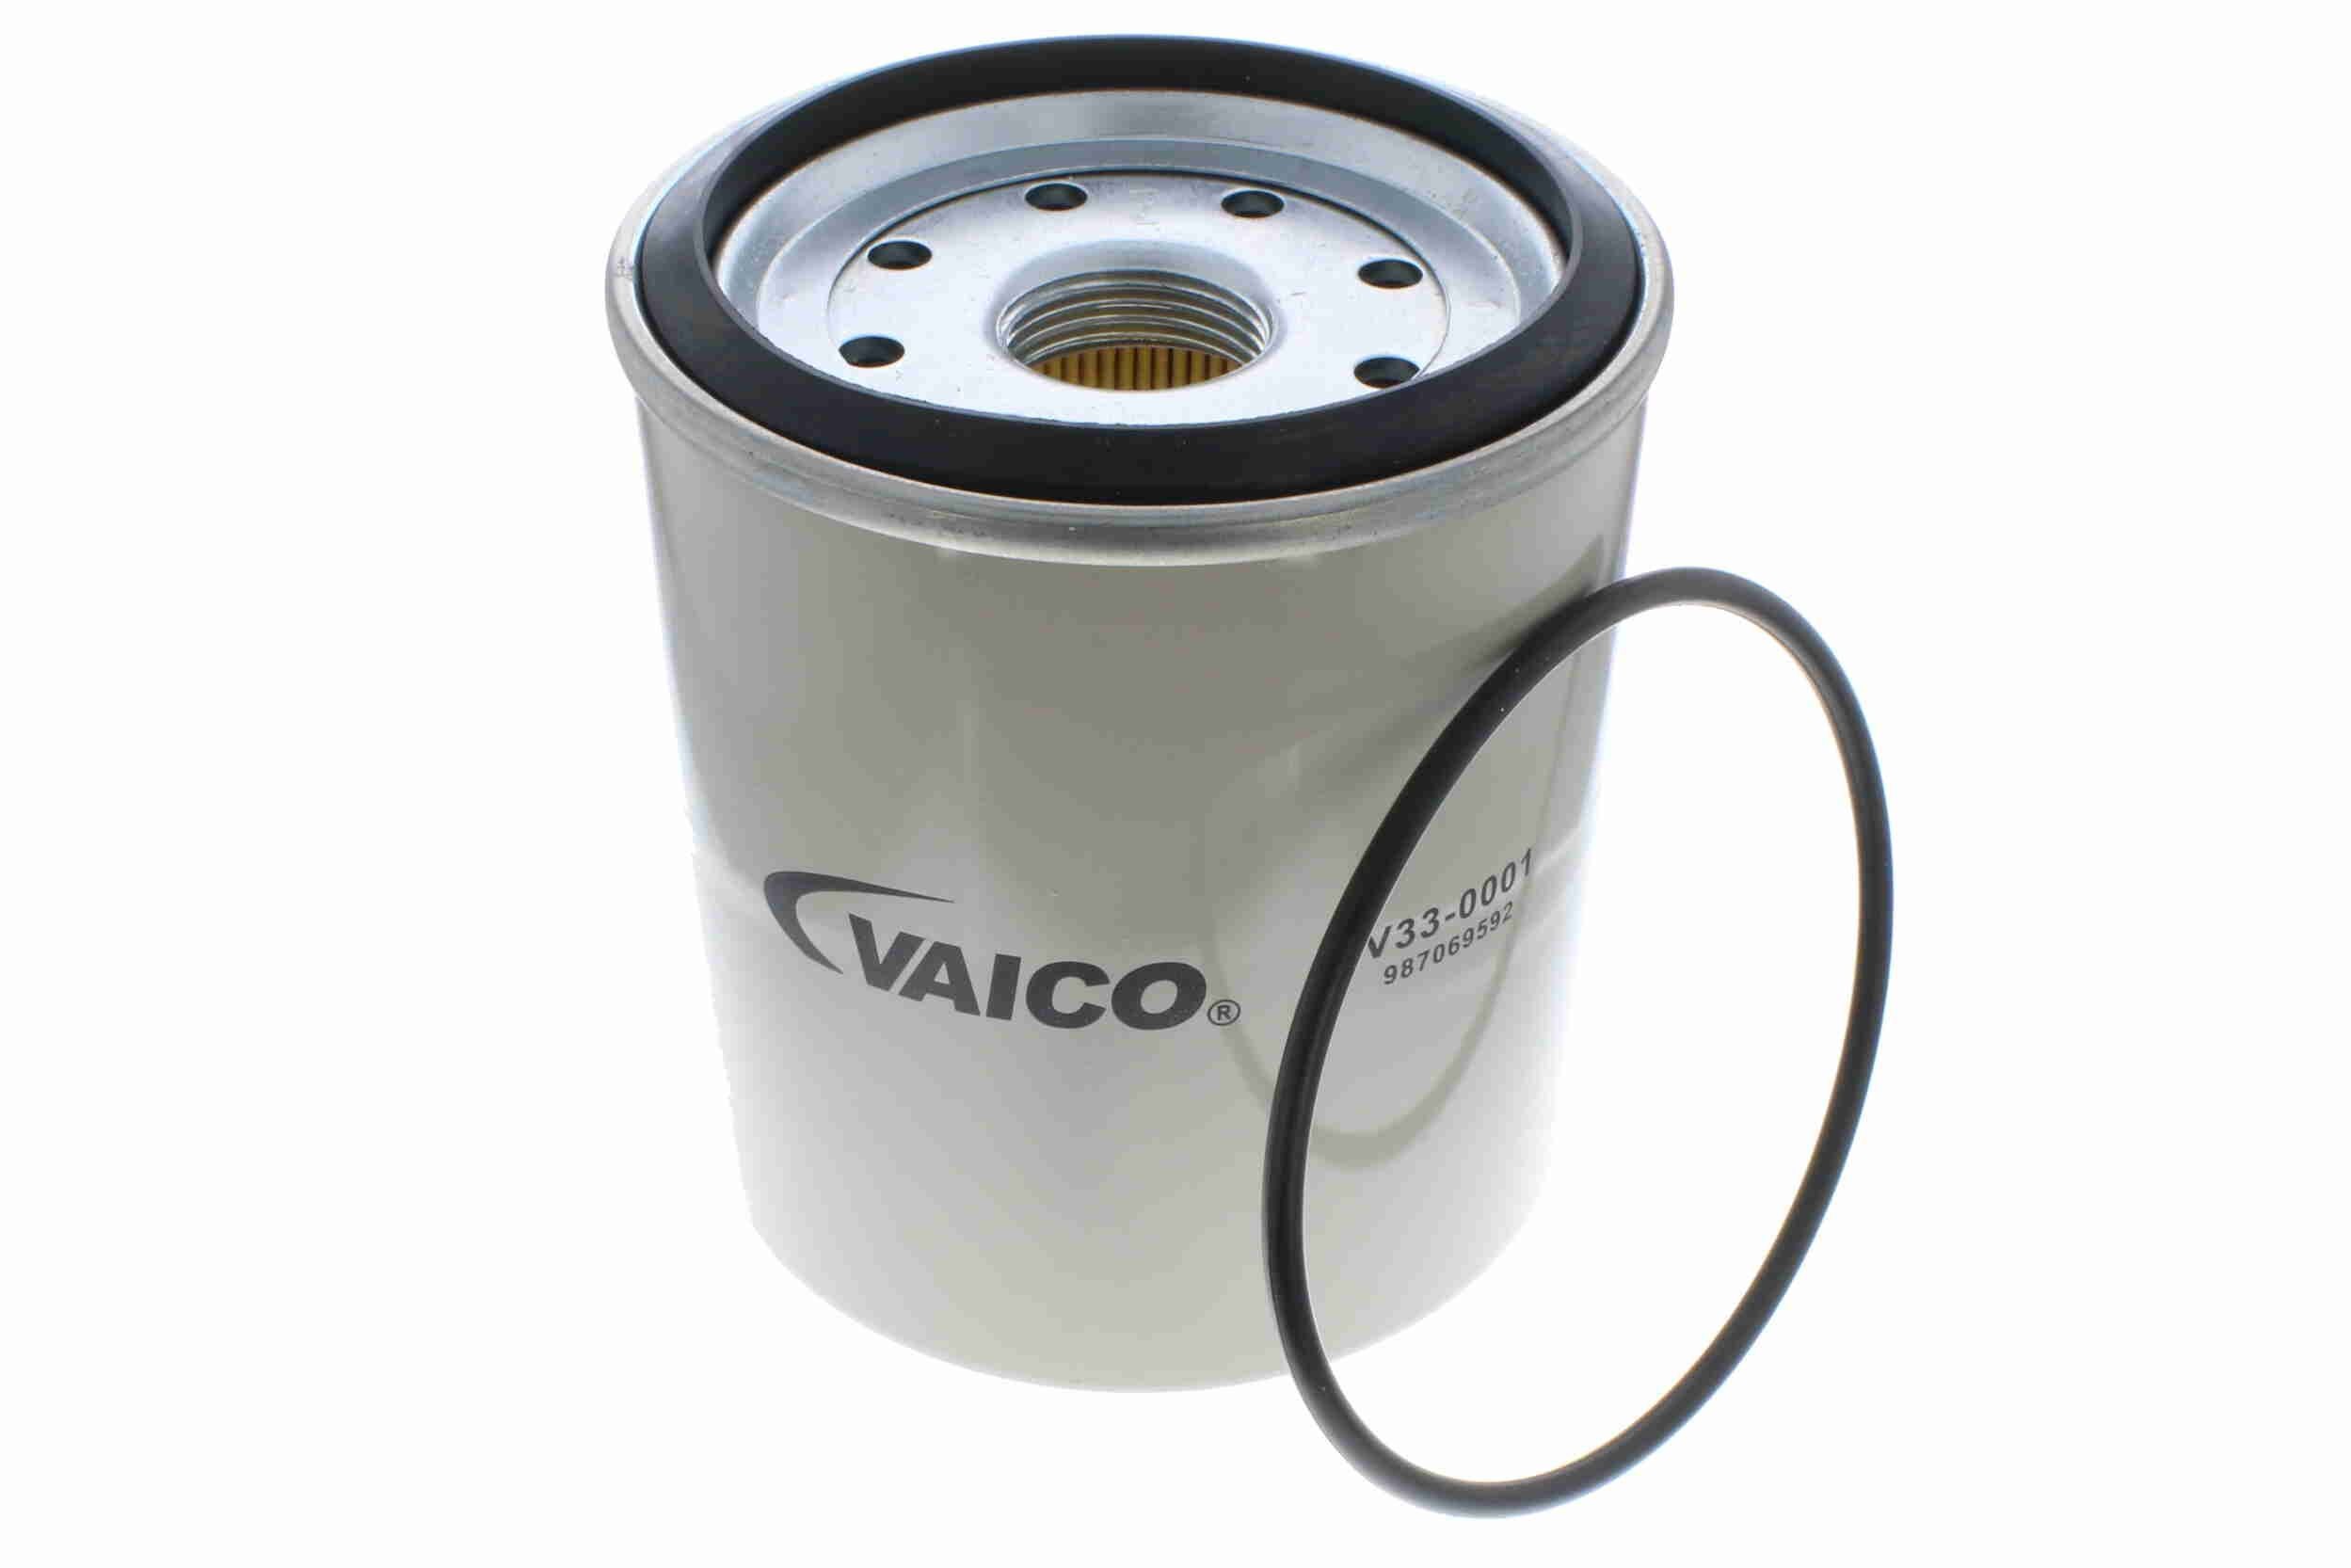 VAICO V33-0001 Fuel filter JEEP experience and price